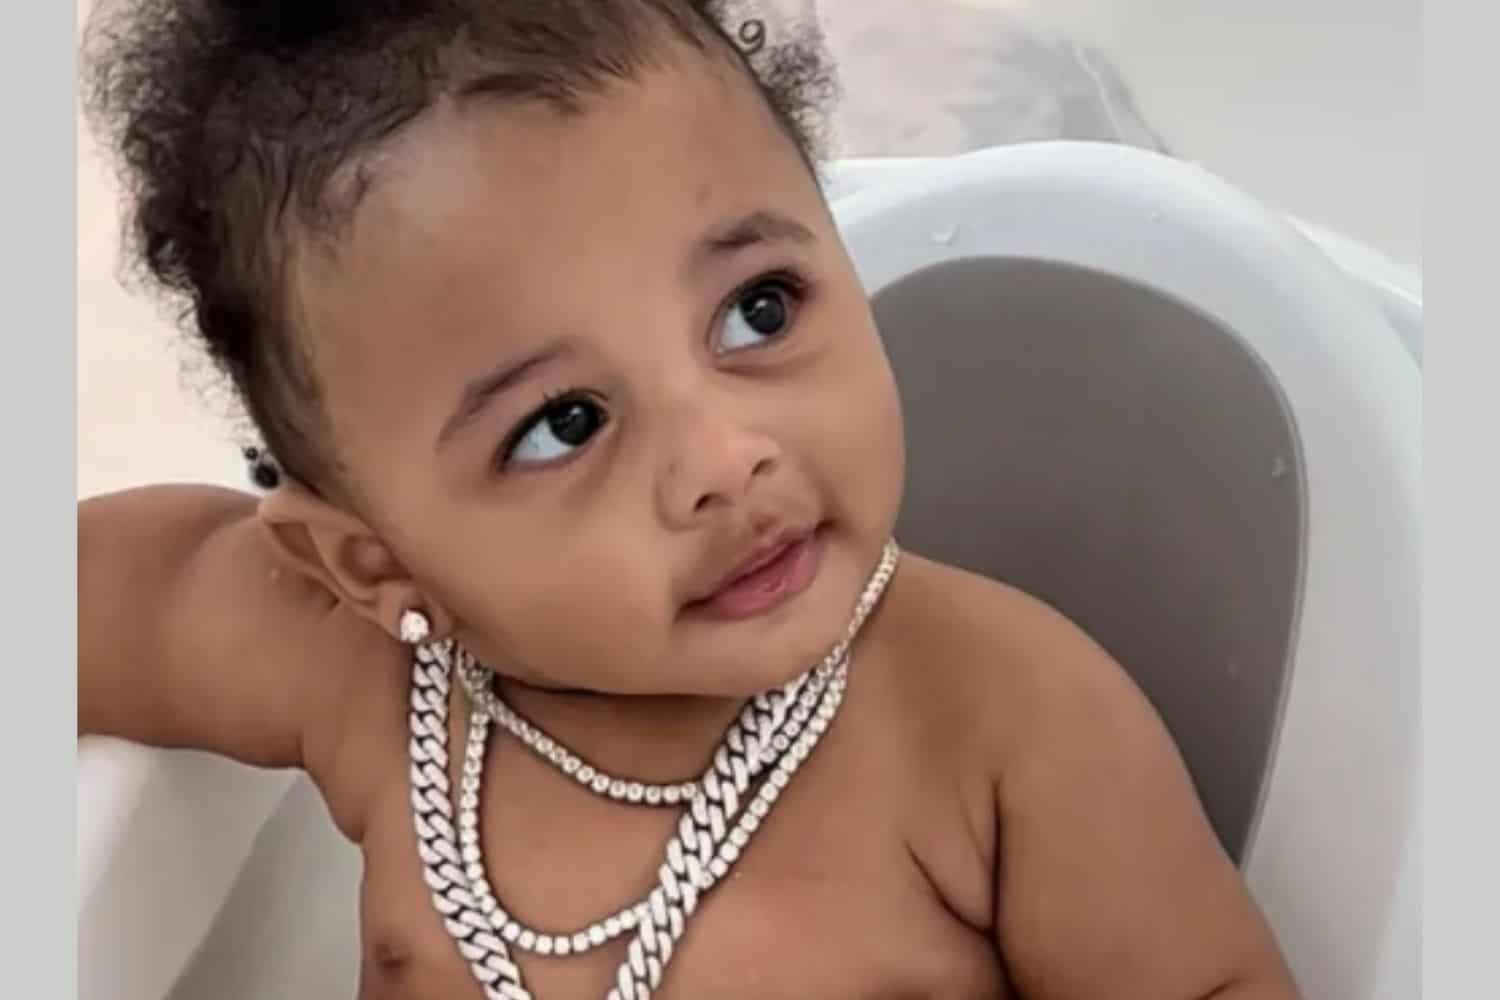 Cardi B and Offset reveal their baby boy's pics and name. Can you guess what it is?Cardi B and Offset reveal their baby boy's pics and name. Can you guess what it is?